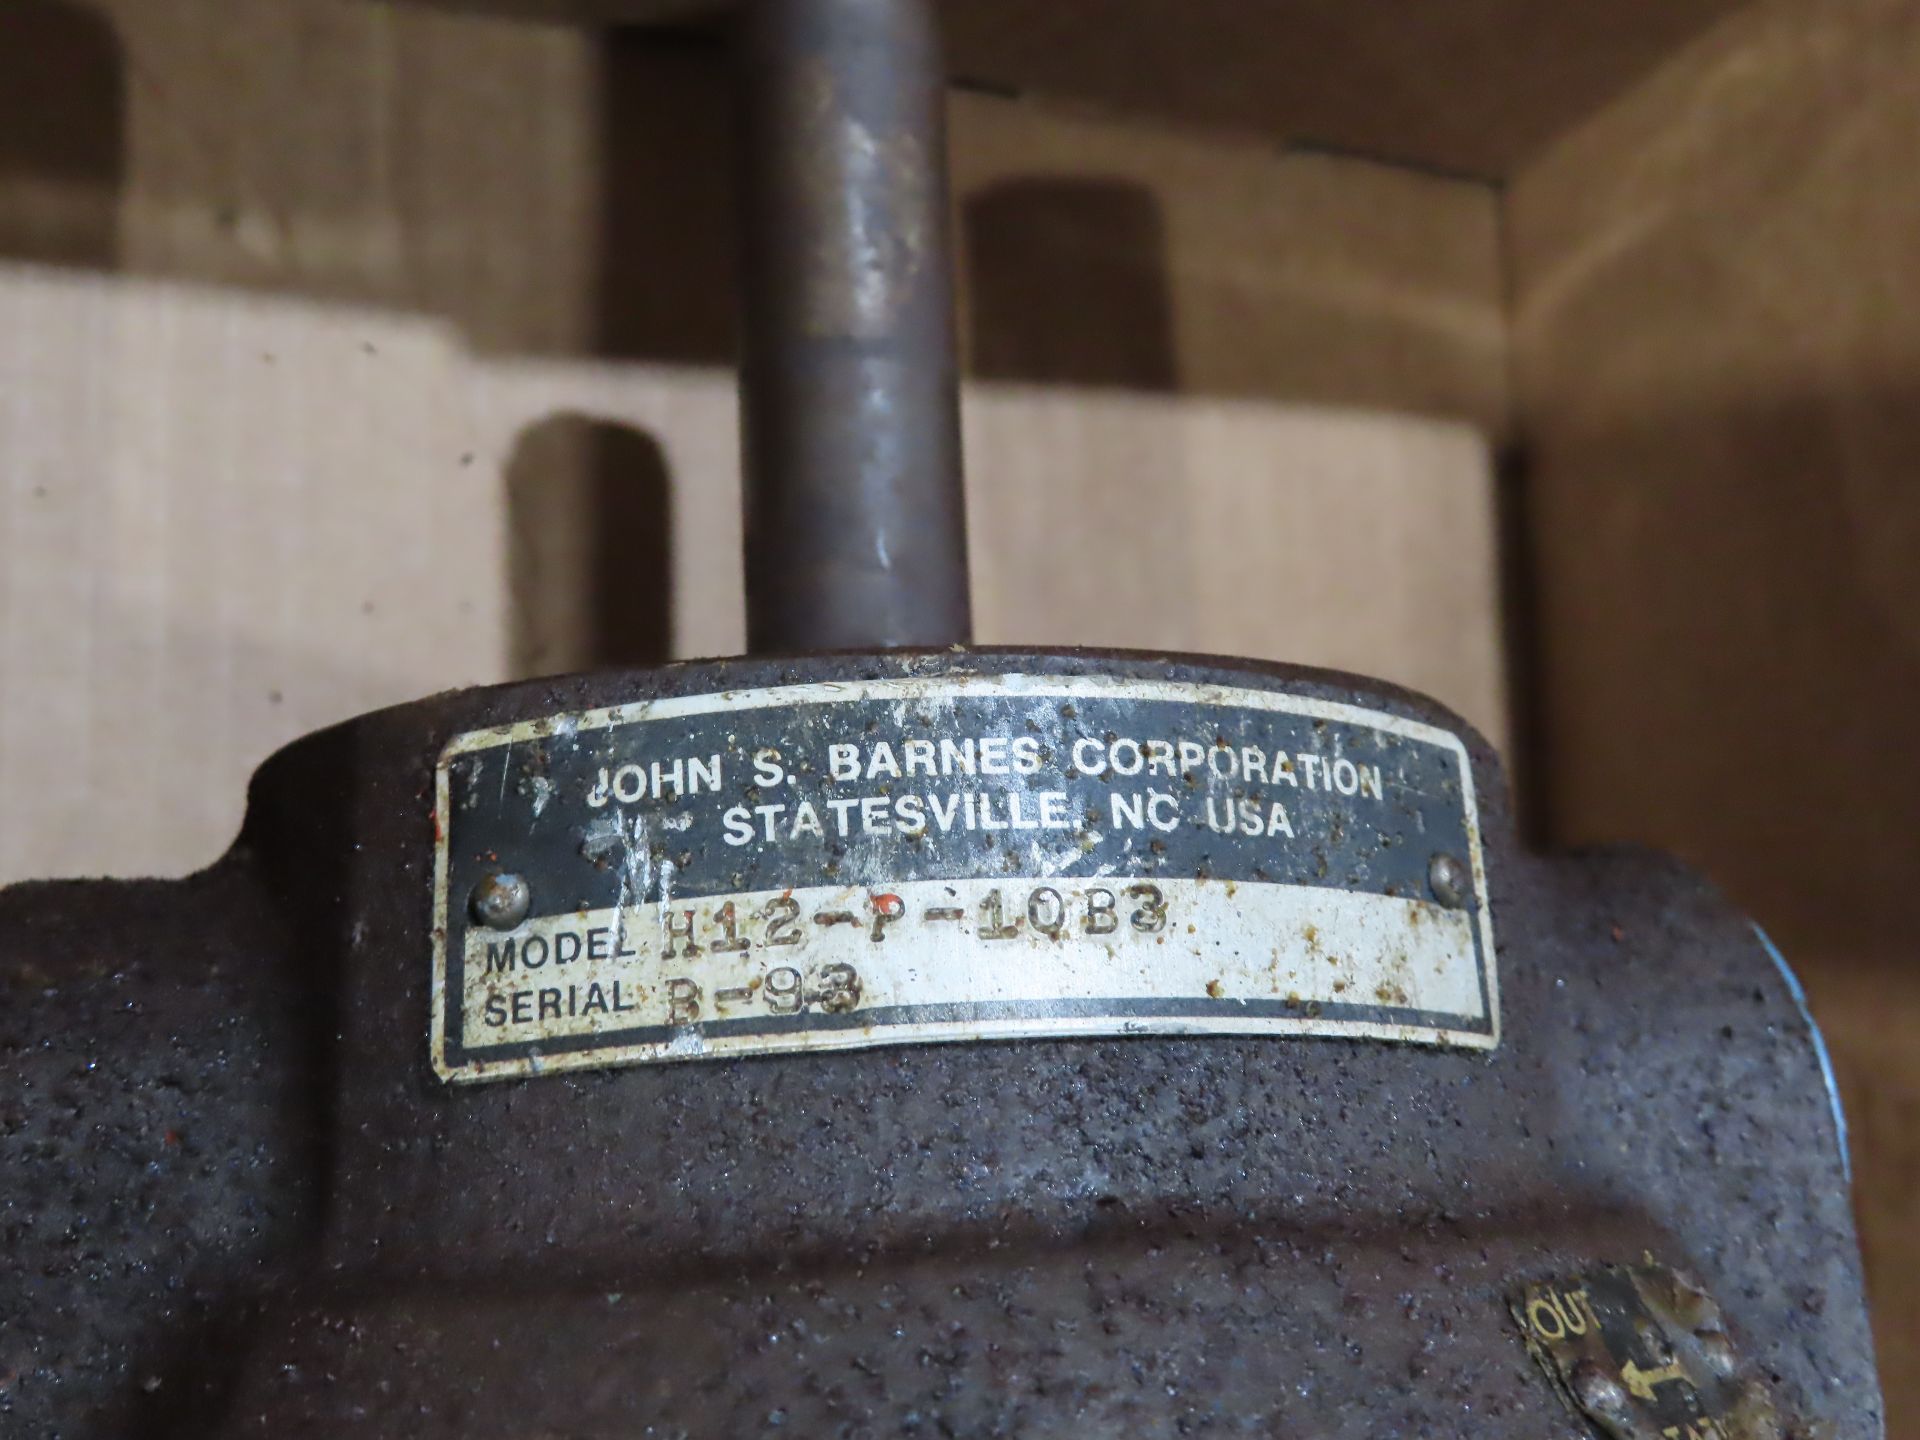 John Barnes model H12-P-10B3, used parts crib spare, as always with Brolyn LLC auctions, all lots - Image 2 of 2